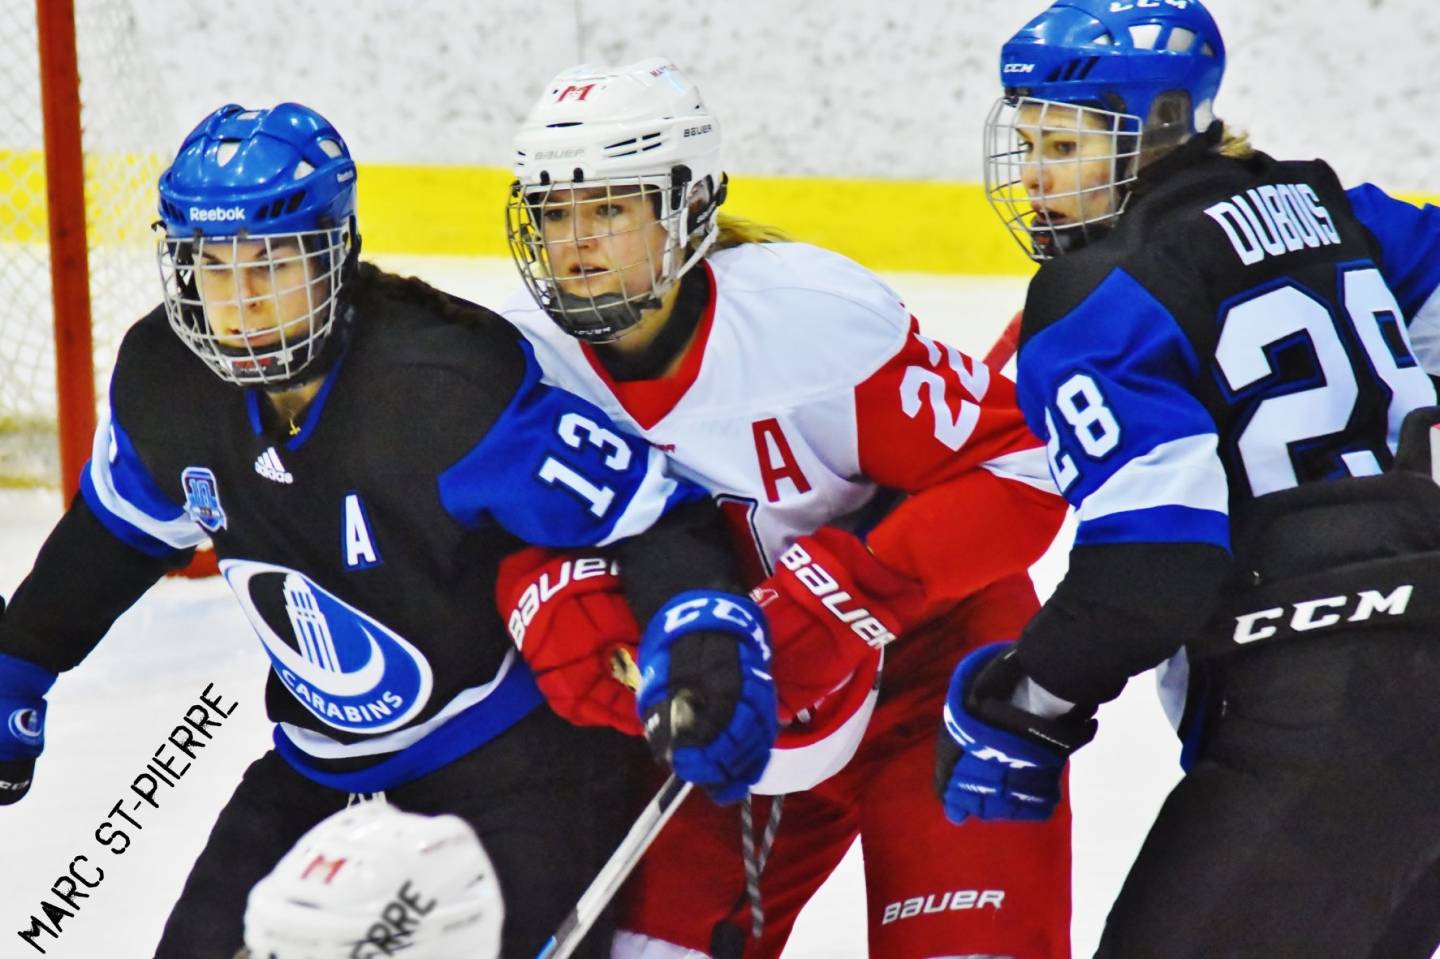 Alexandra Labelle Joins New York Team in Professional Women’s Hockey League